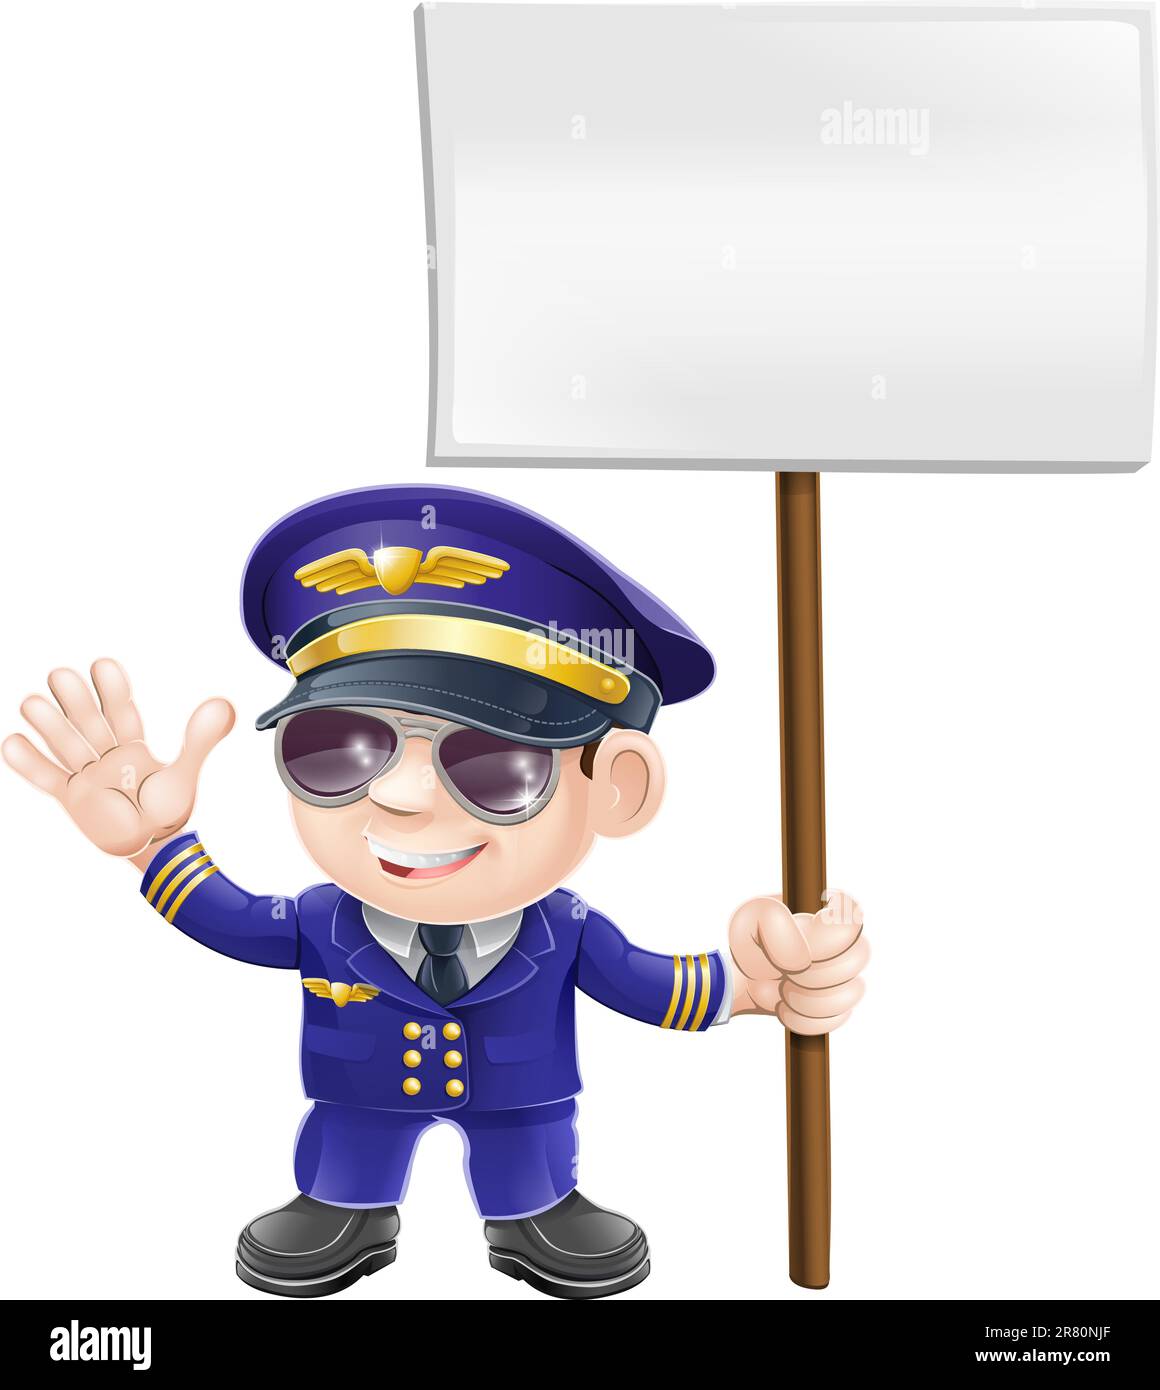 Illustration of a cute airplane pilot character waving and holding message sign Stock Vector